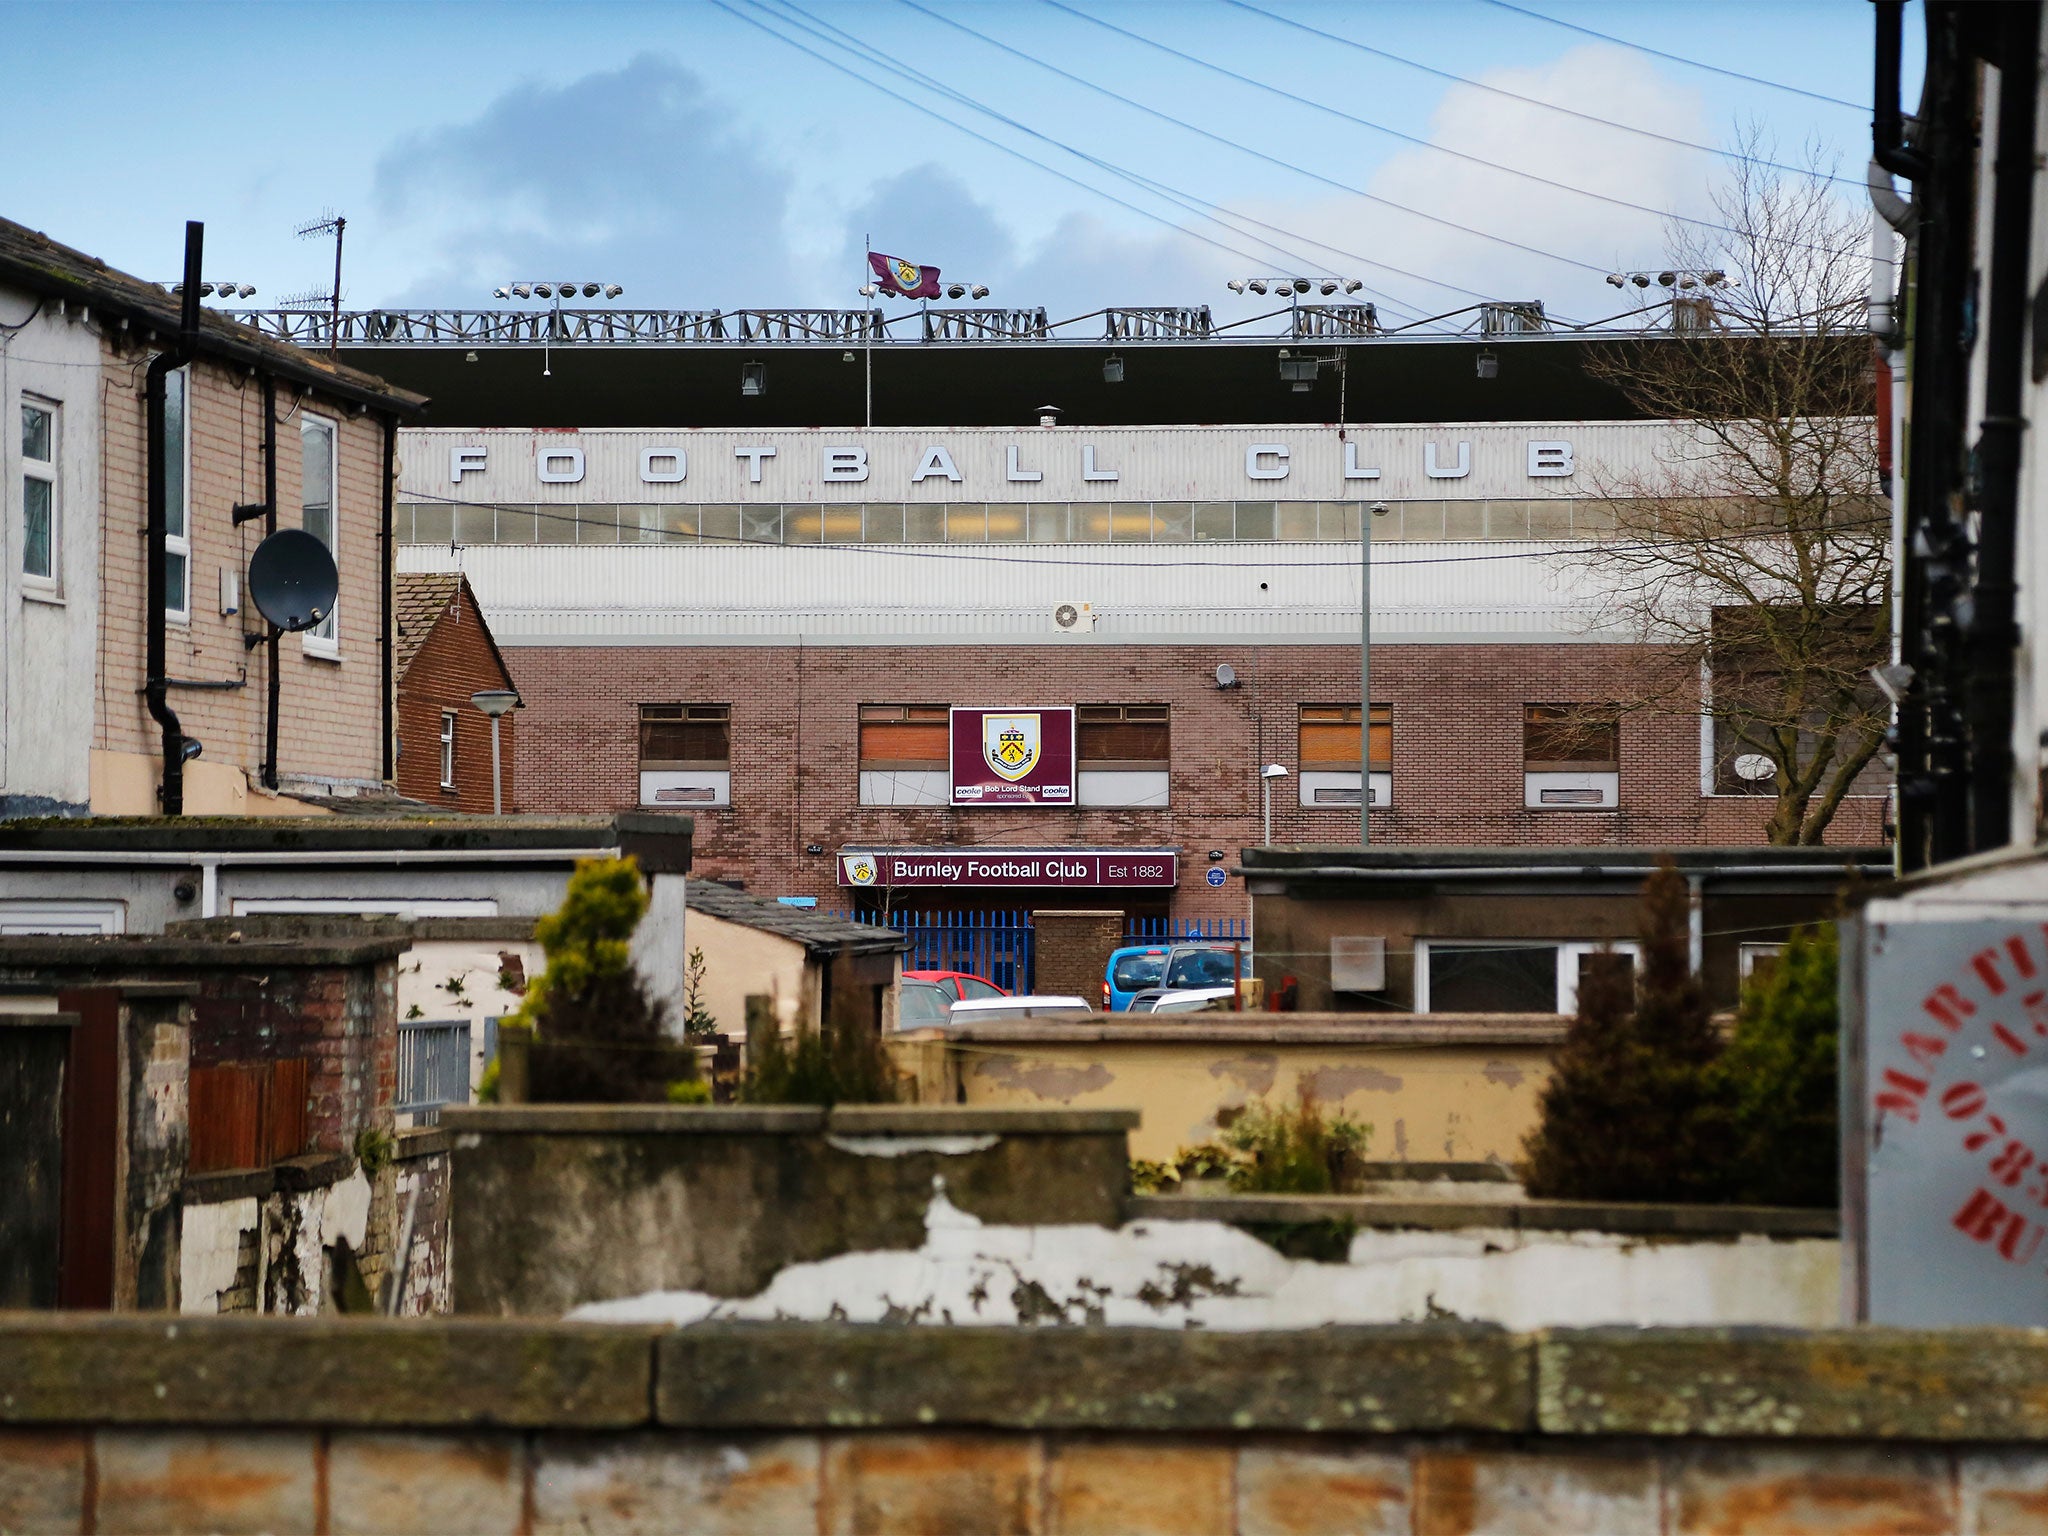 Turf Moor is a unique Premier League destination and the home to its most intriguing project